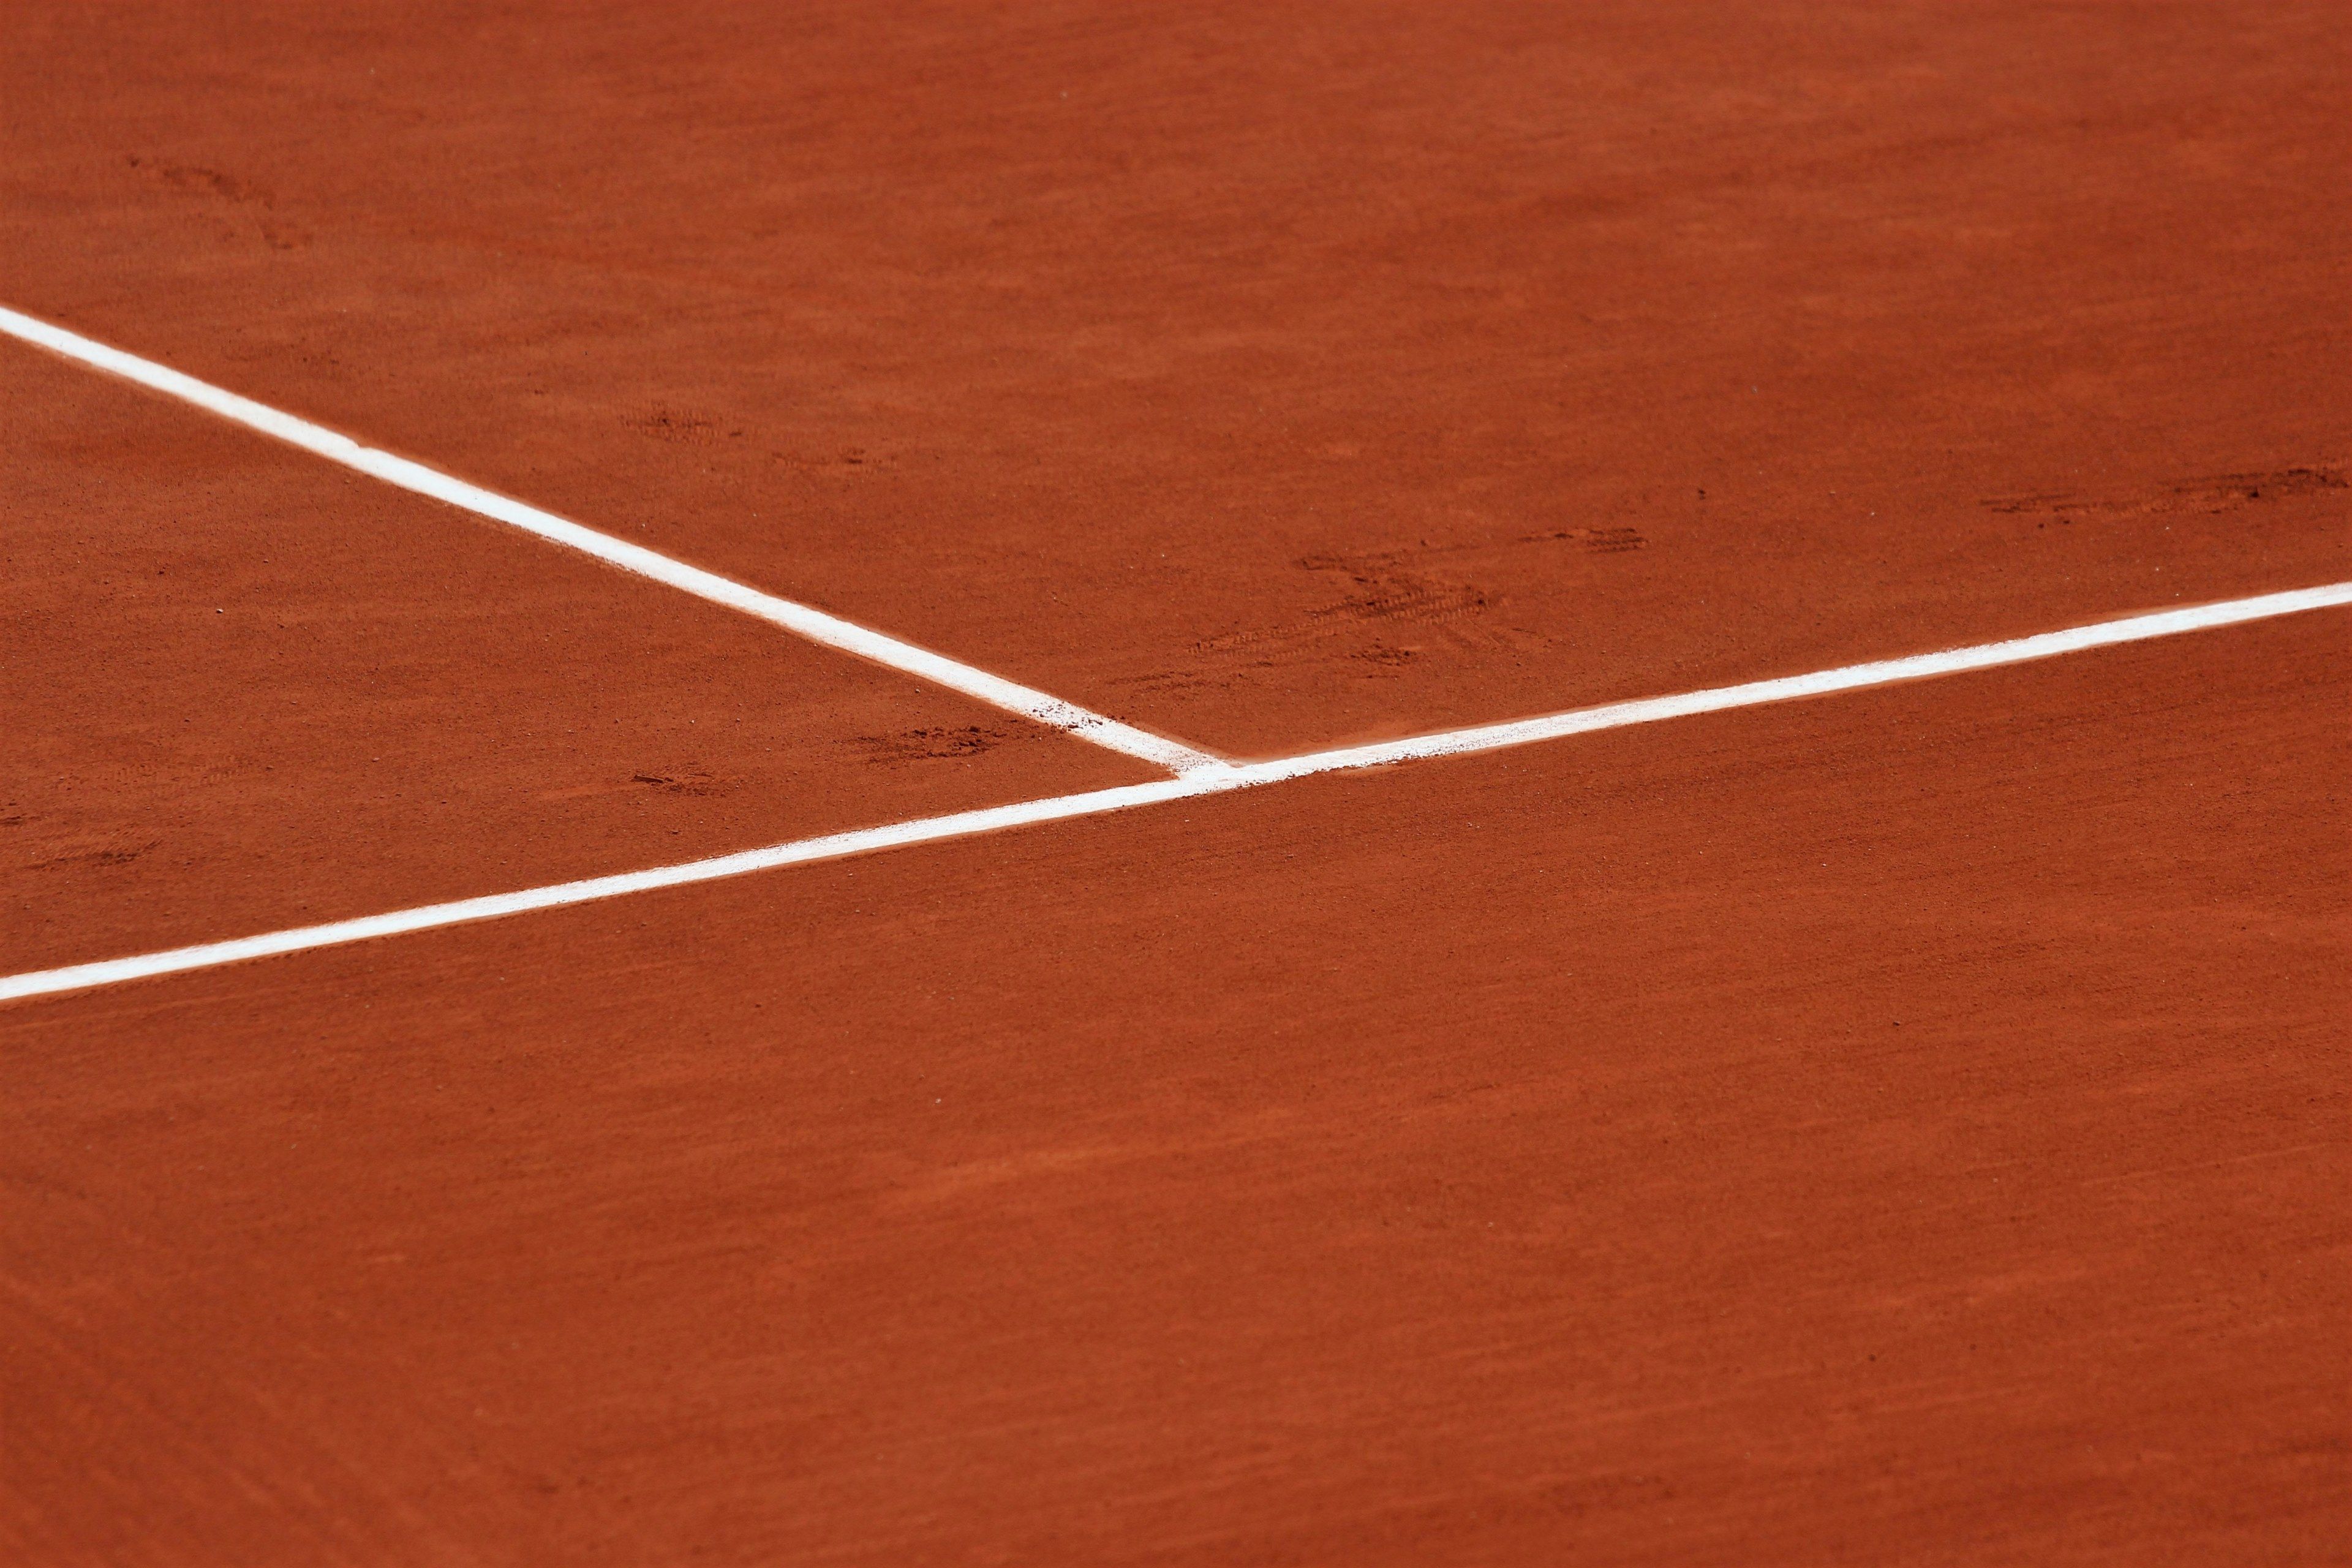 Wallpaper / the view of a white tennis line markings